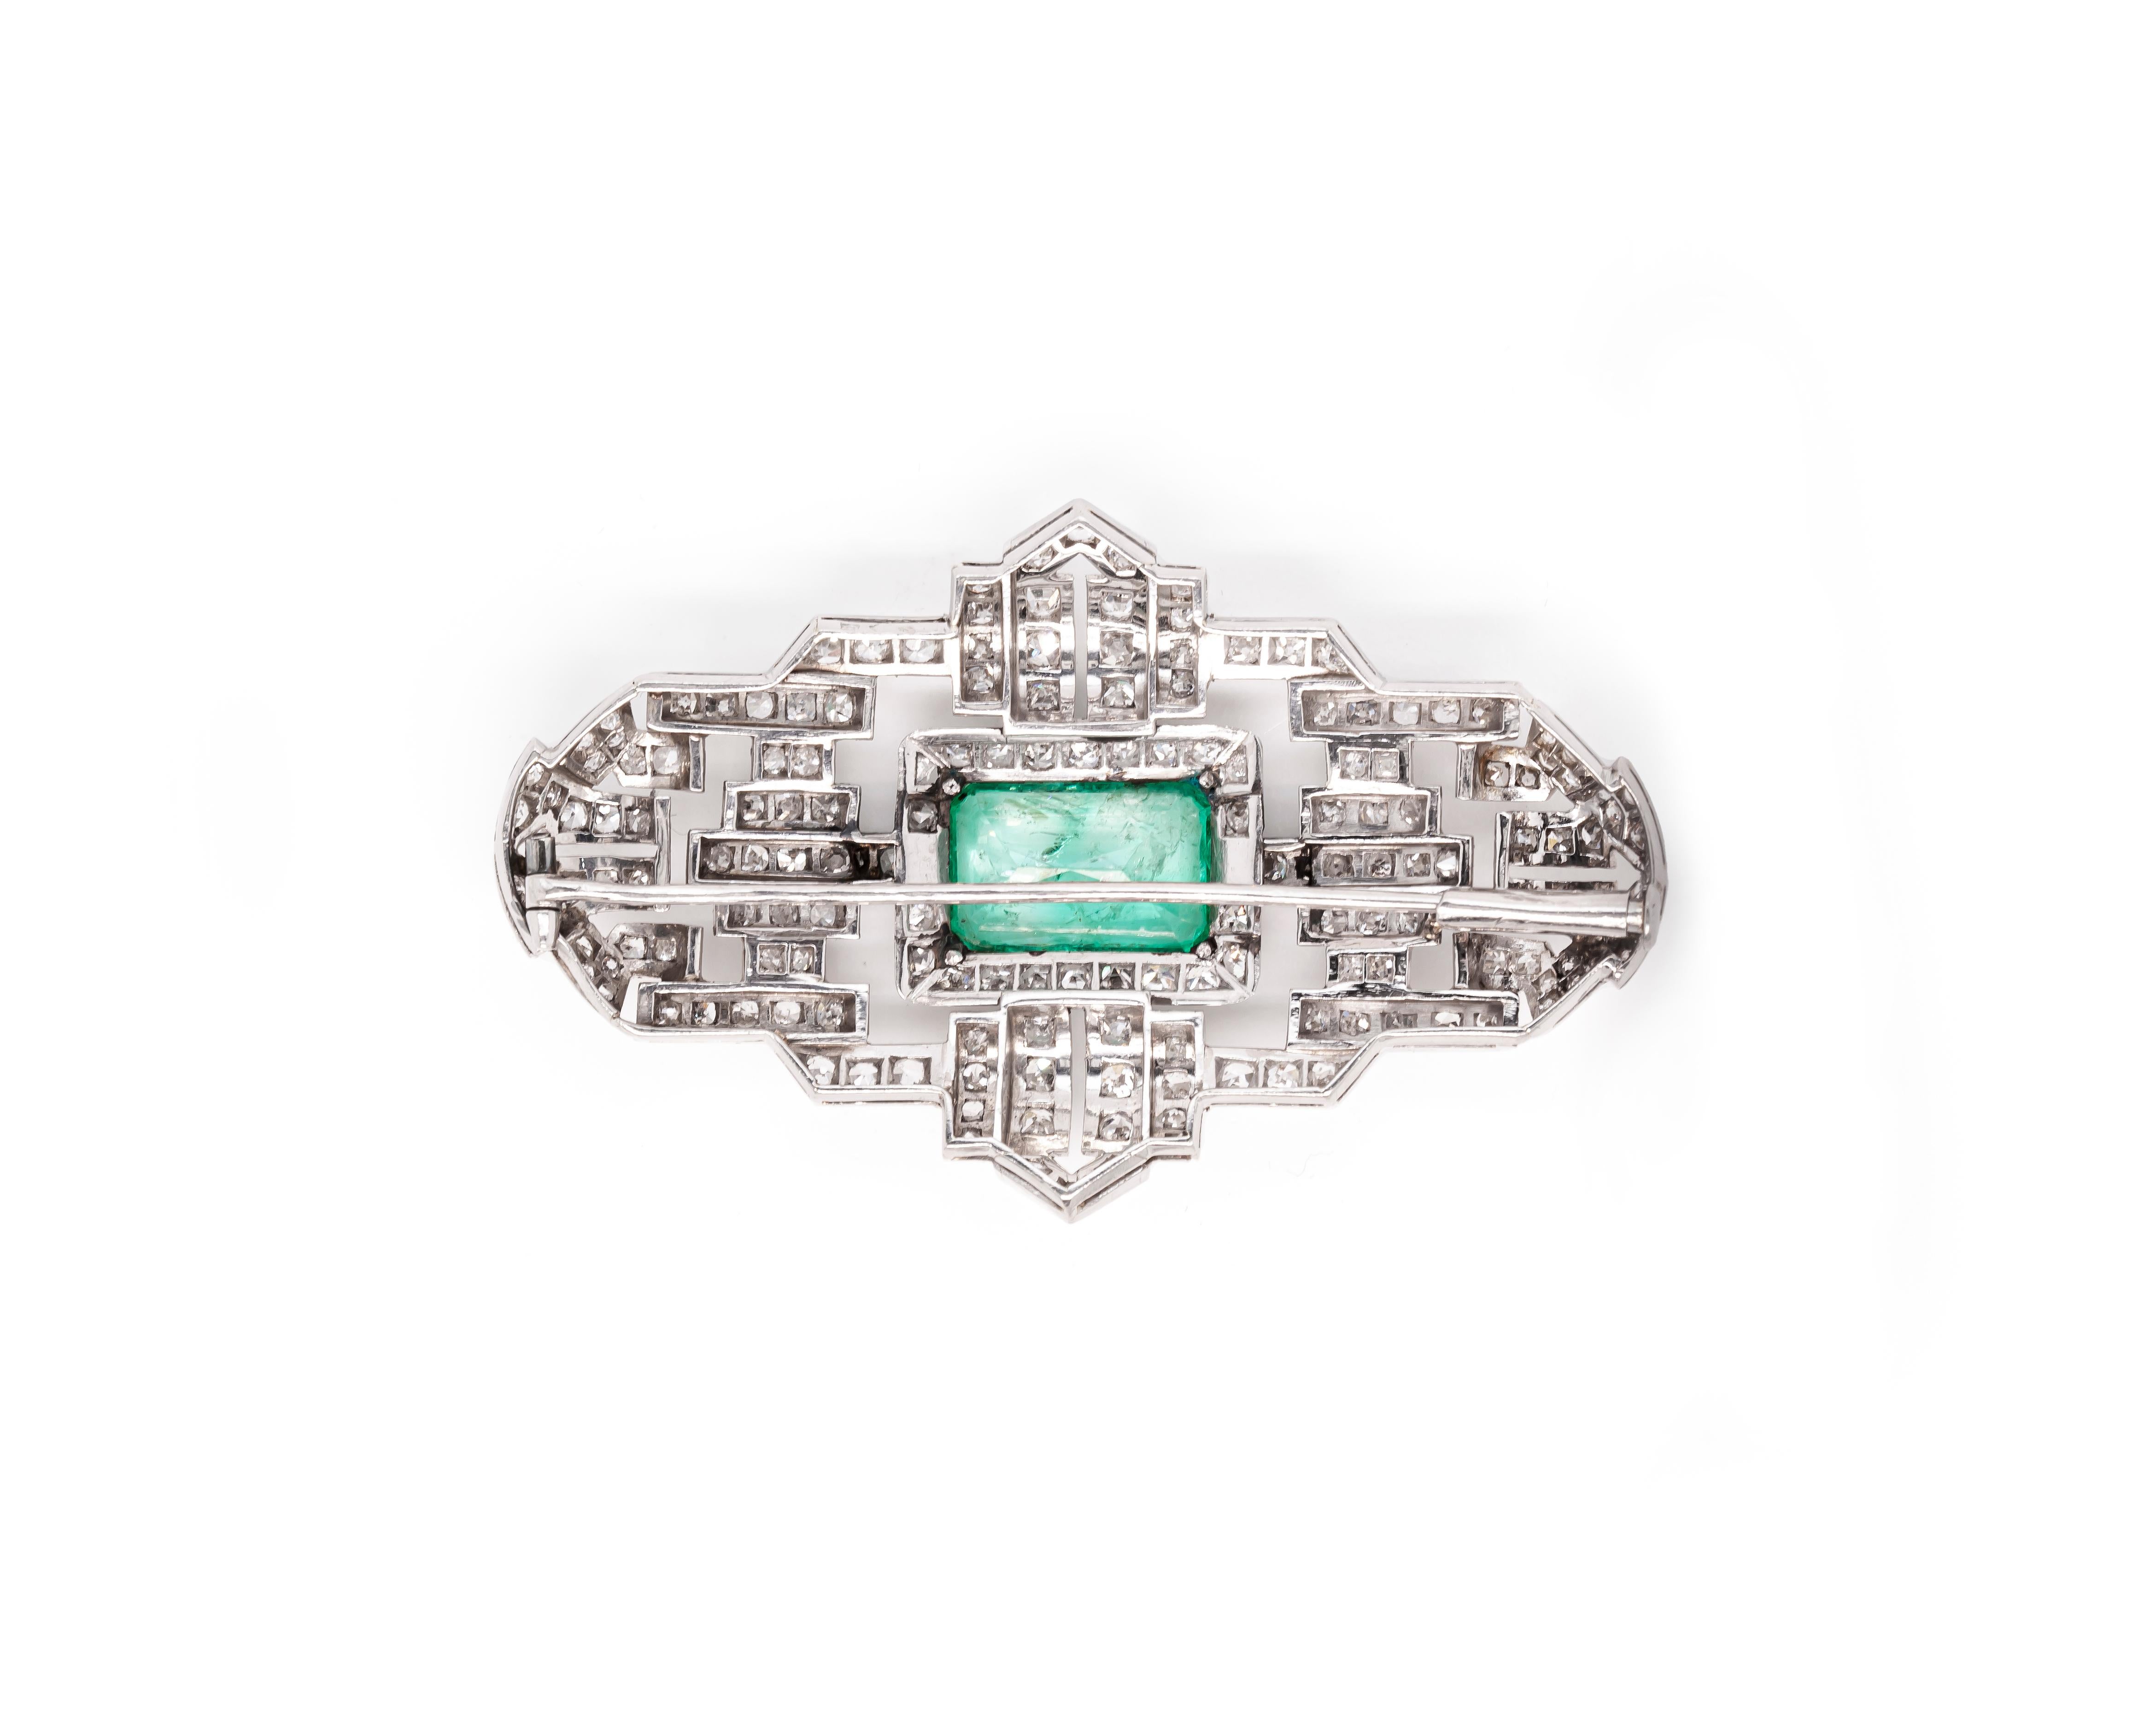 This one of a kind Art Deco brooch showcases a geometric open work design finely crafted from solid platinum. Taking centre stage is a wonderful emerald cut emerald, weighing approximately 6.50ct, mounted in a rubover milgrain edged, open back